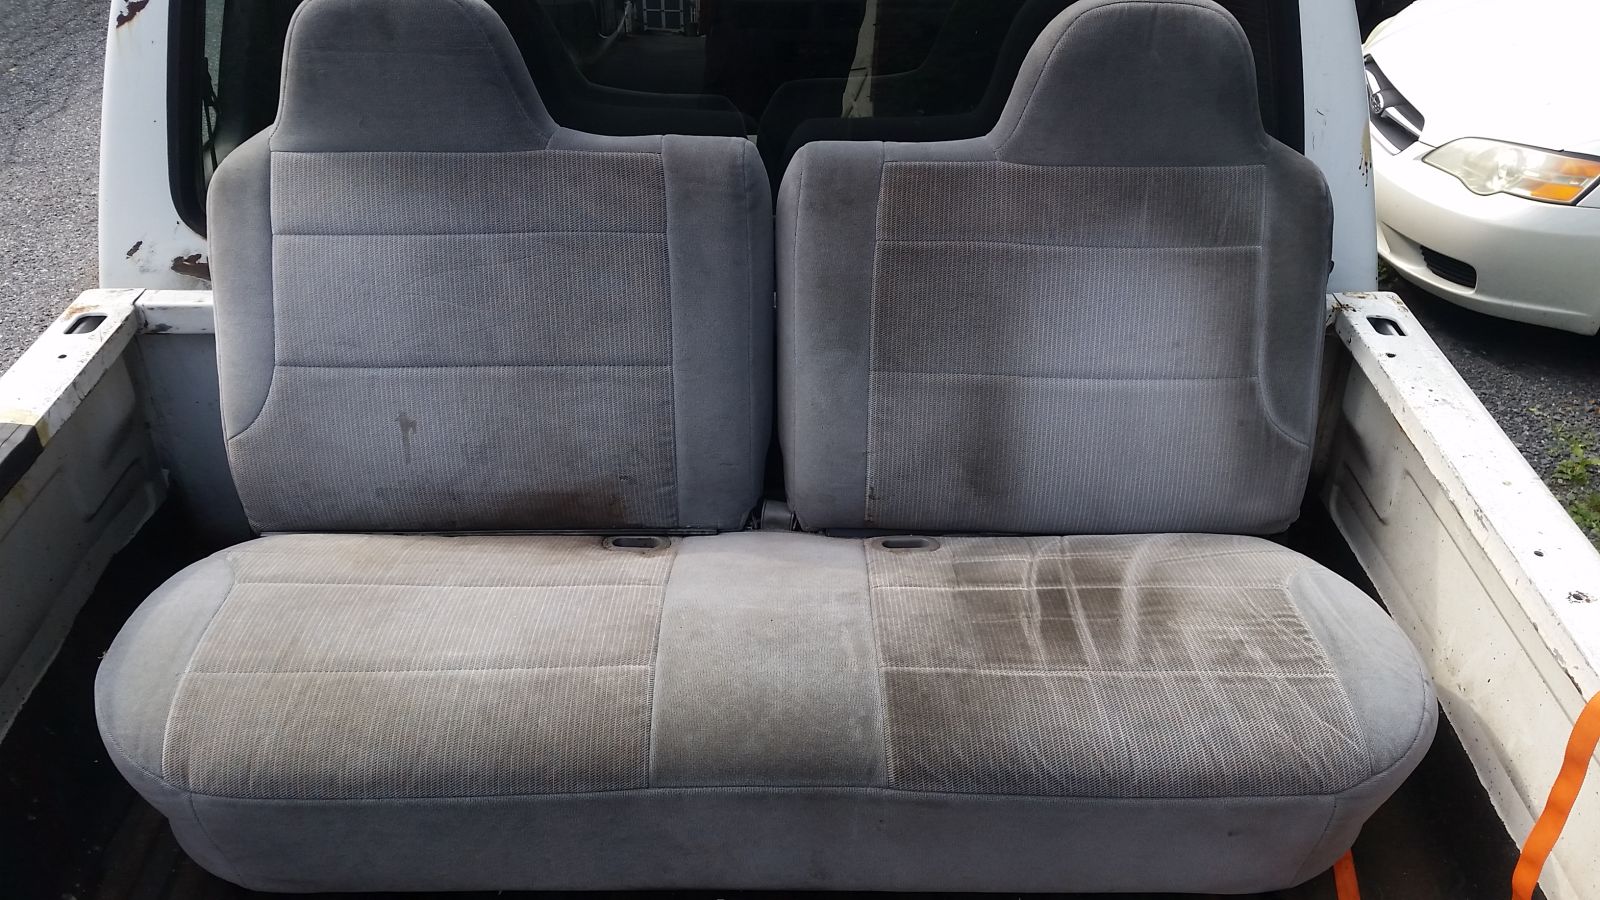 Illustration for article titled Finally found a good untorn bench seat. (update more pics)